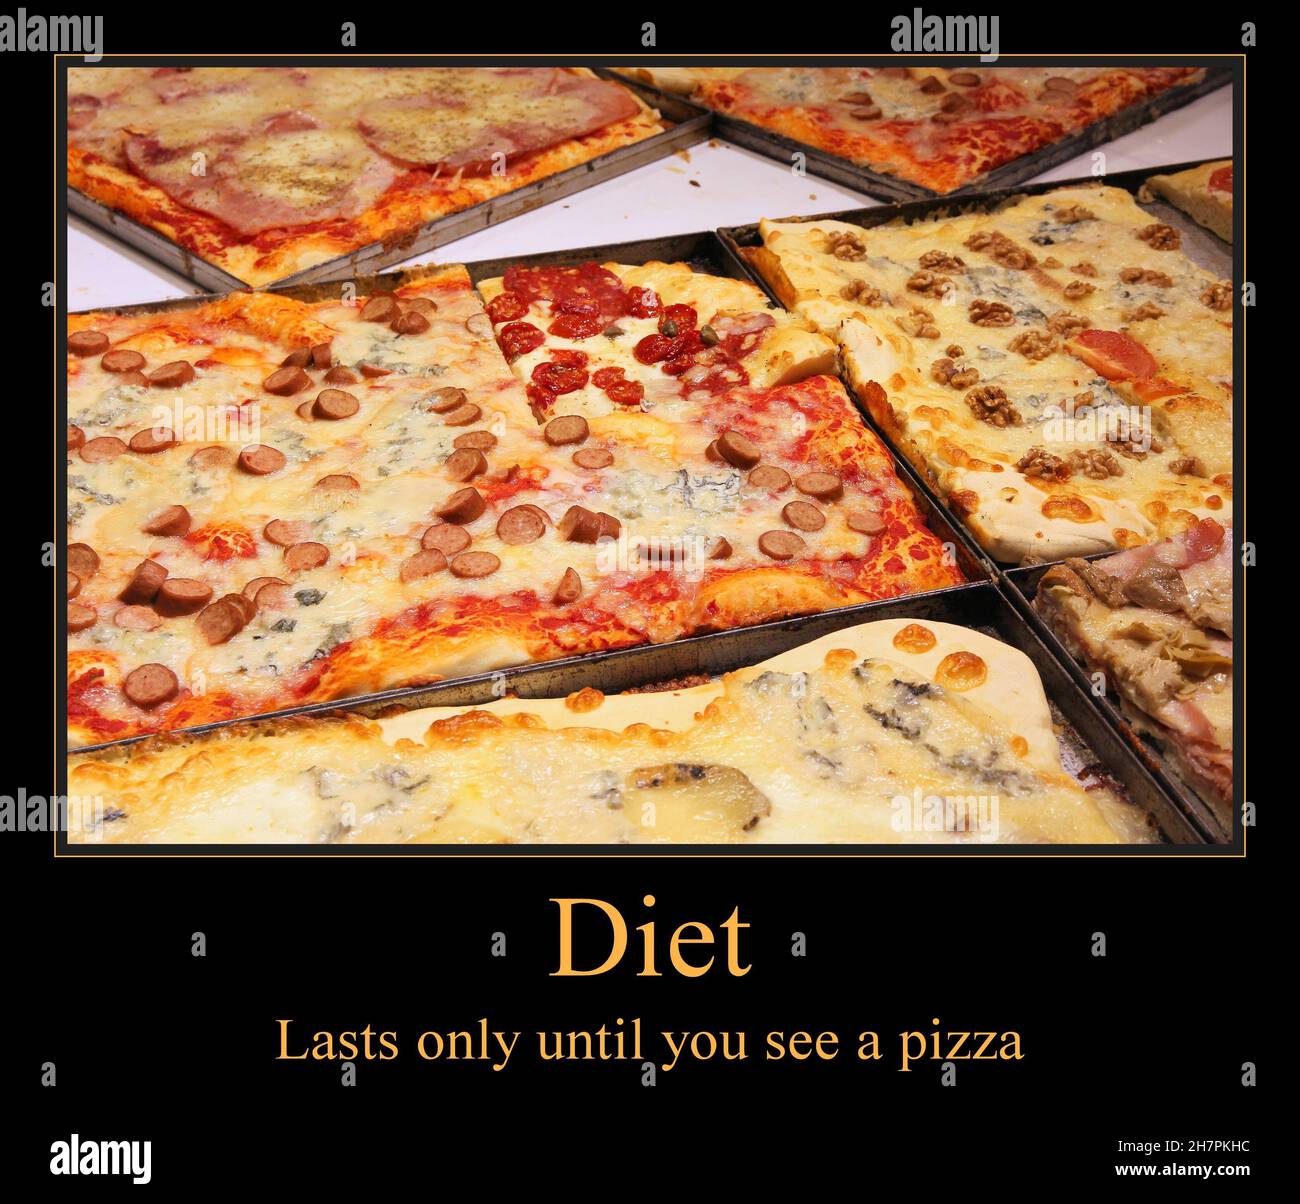 Pizza funny meme for social media sharing. Diet problems. Demotivational poster. Stock Photo